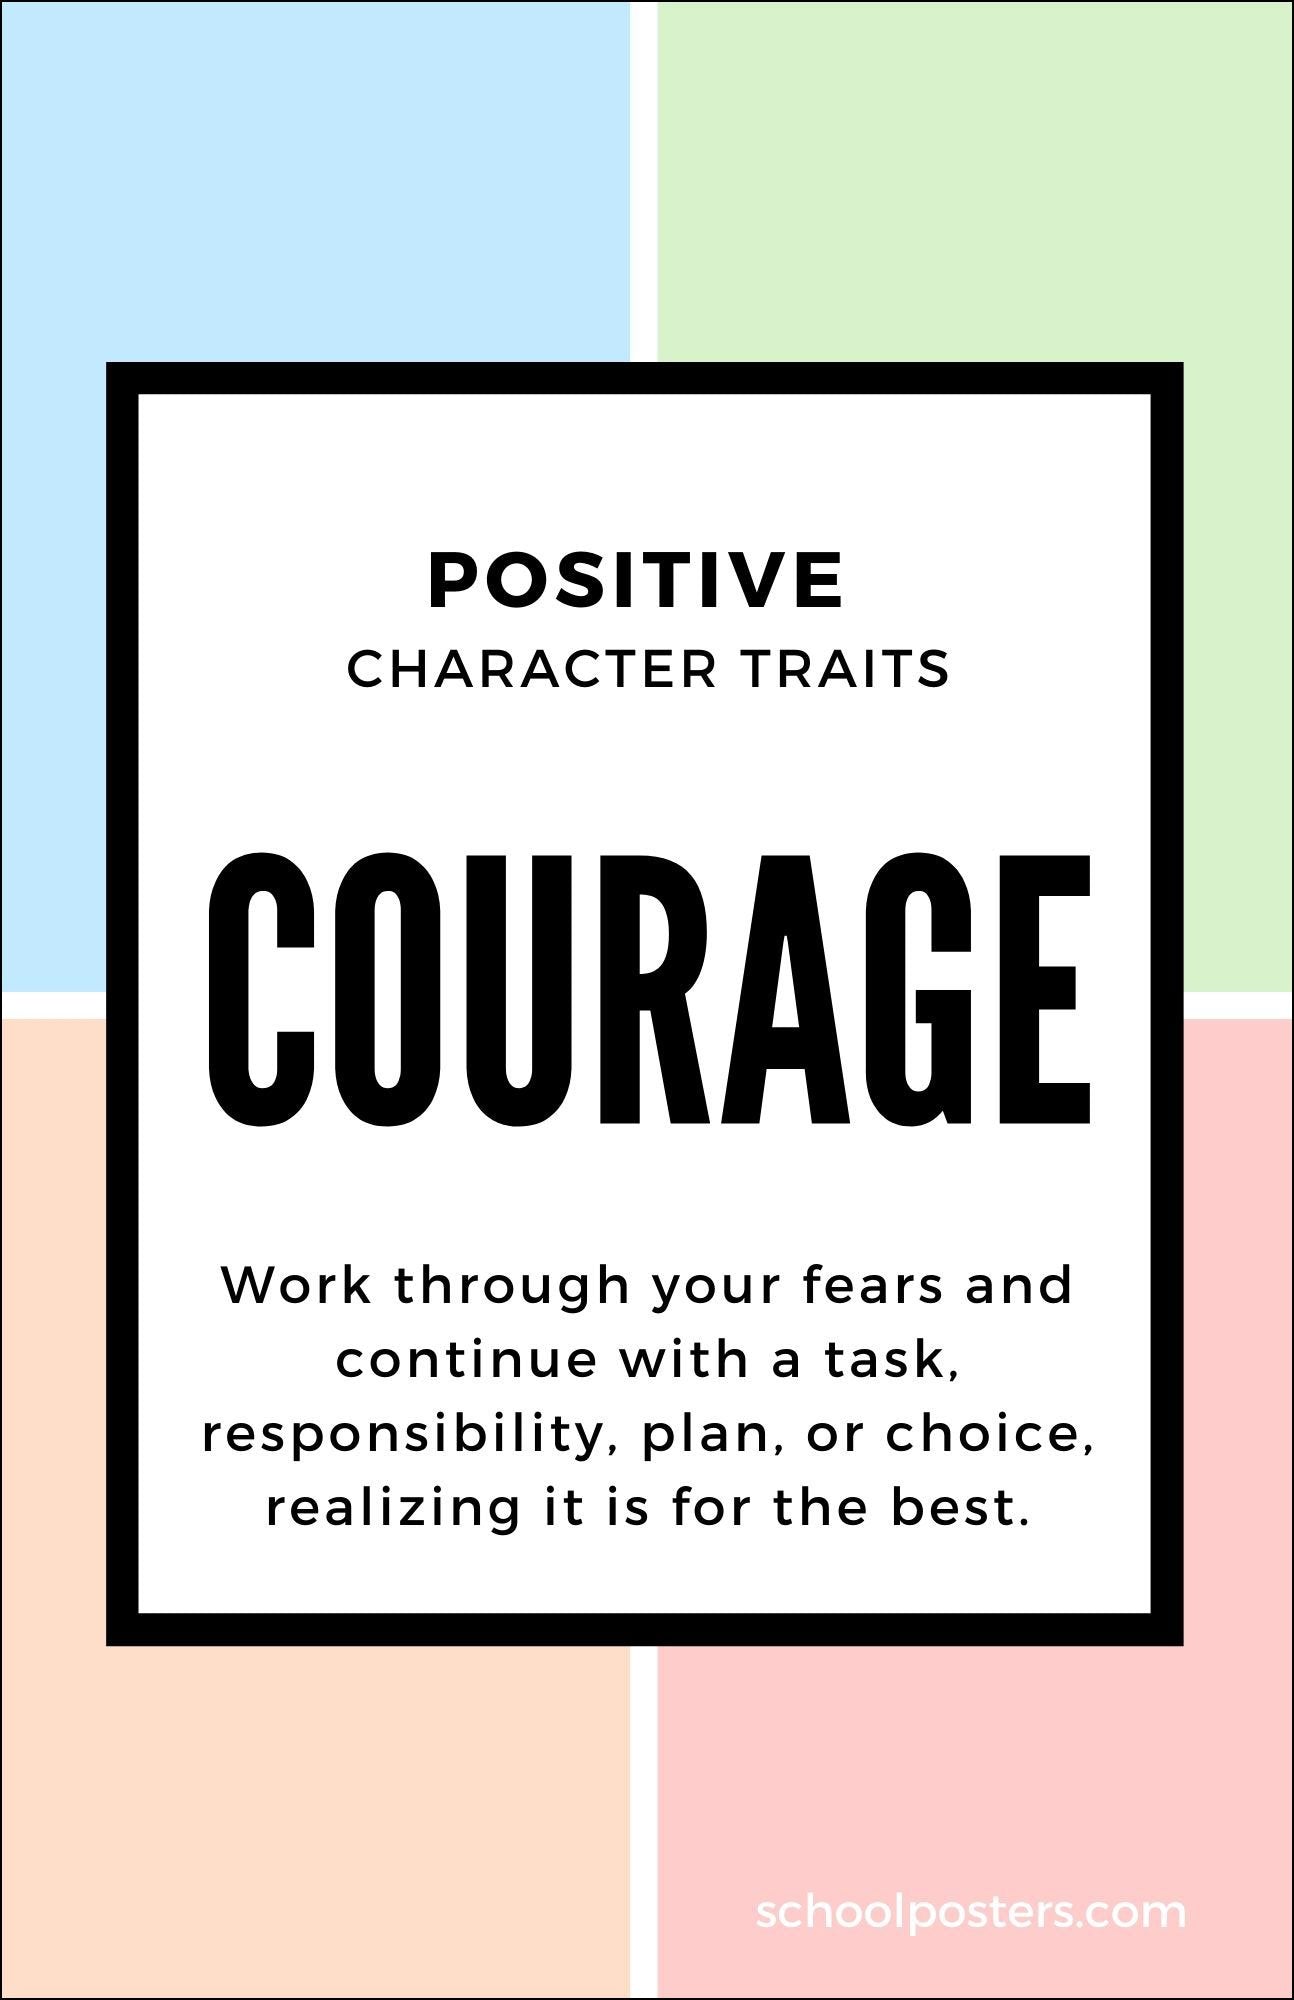 Character Courage Poster